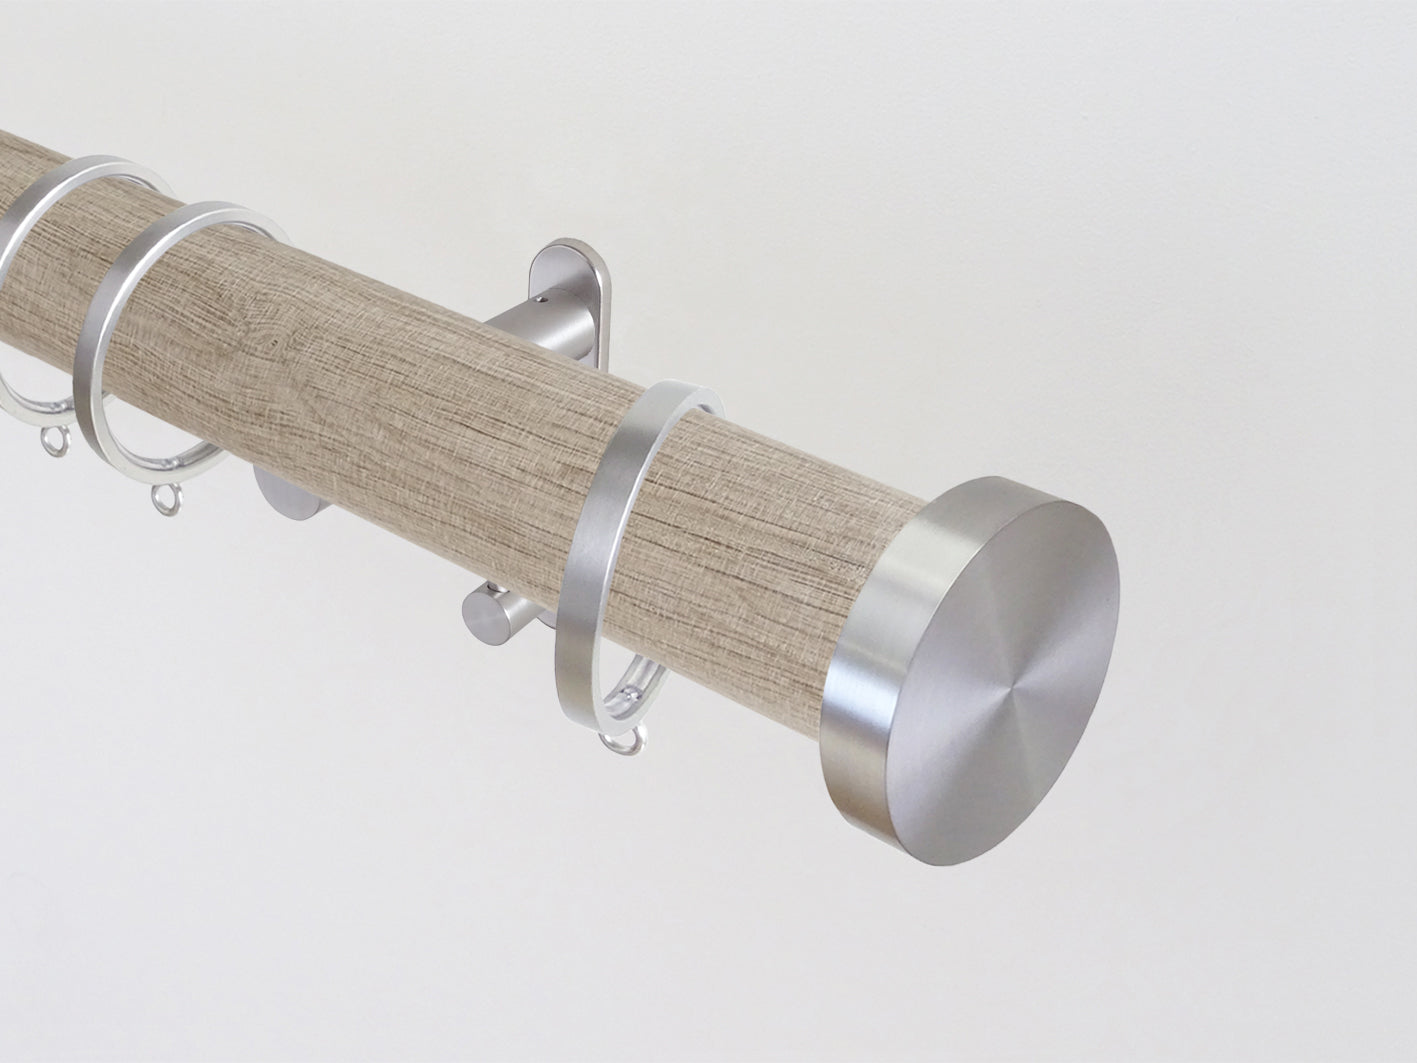 Real solid oak curtain pole - unfinished. Bronze brackets, finials & rings